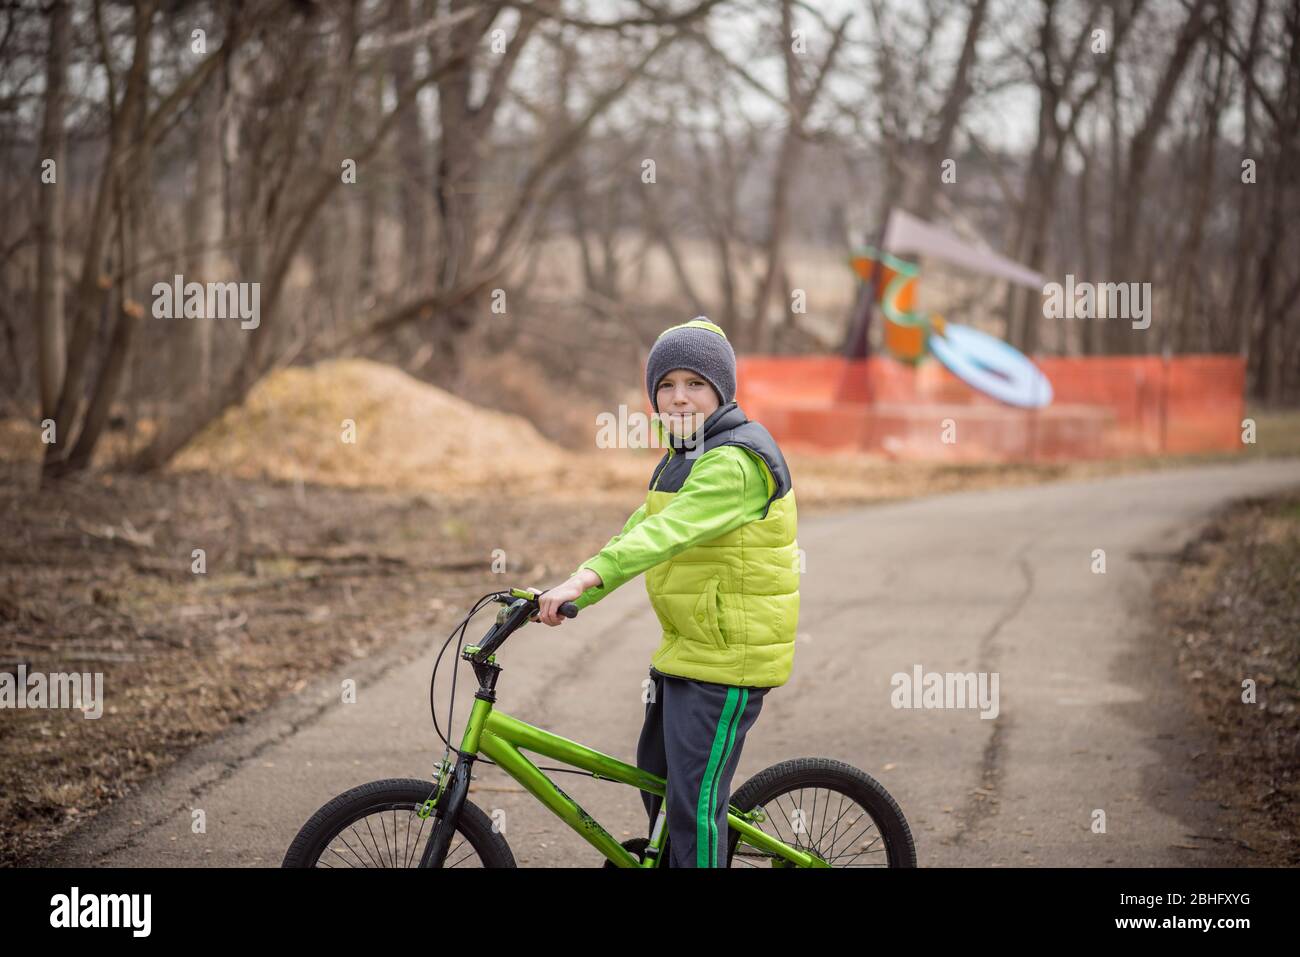 Child on a bicycle on a cloudy day looking at the camera Stock Photo